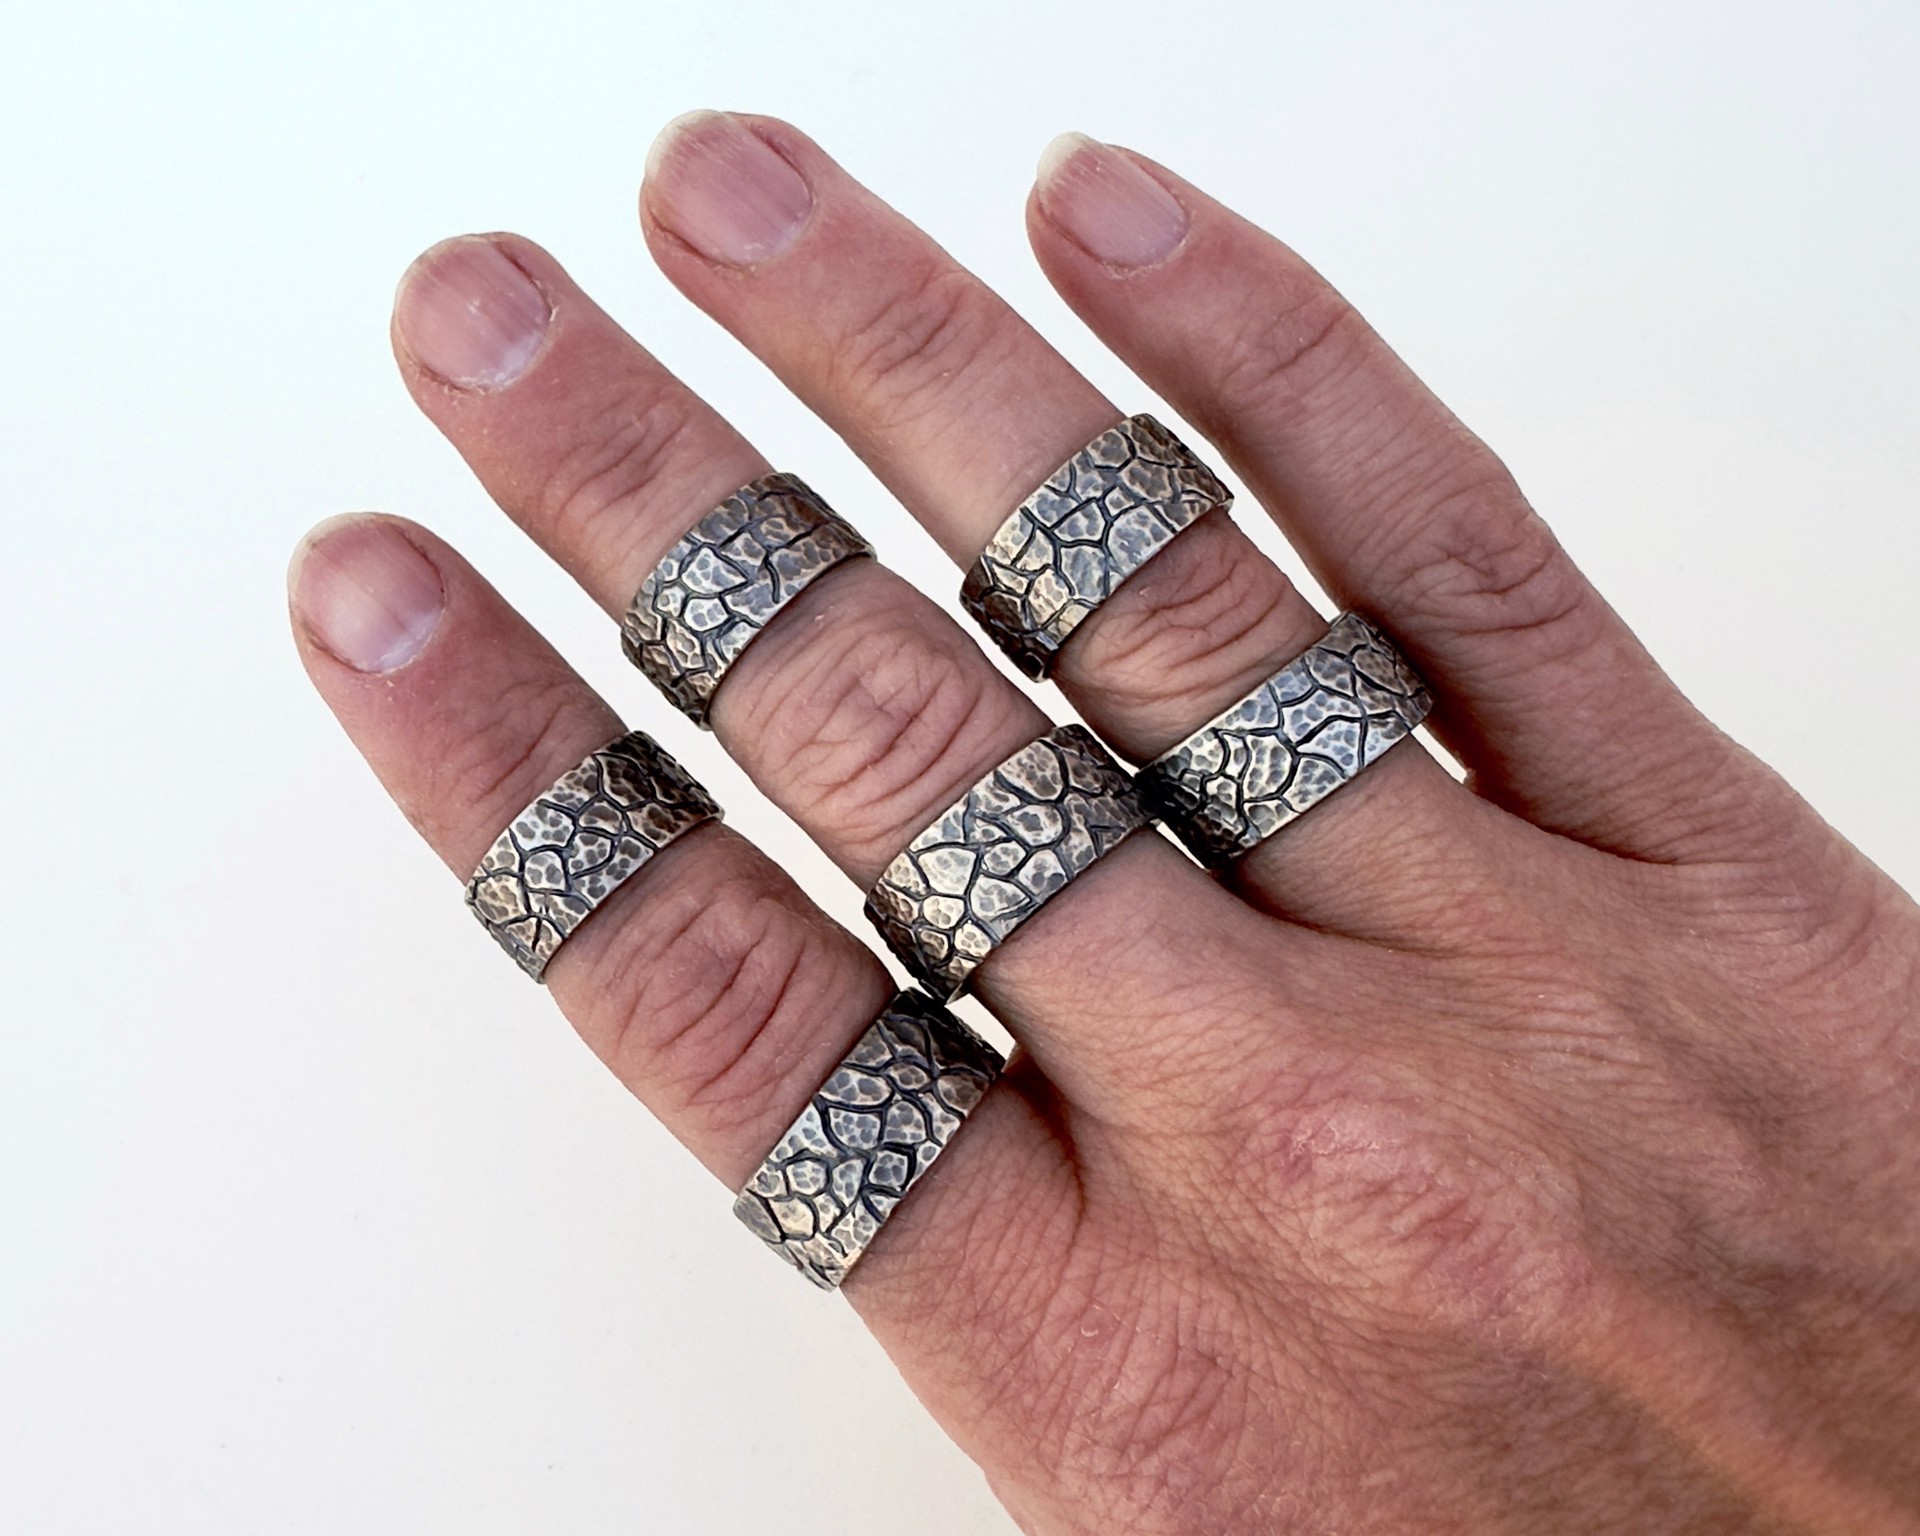 Mud Crack Ring Band - 8 by Clementine & Co. Jewelry